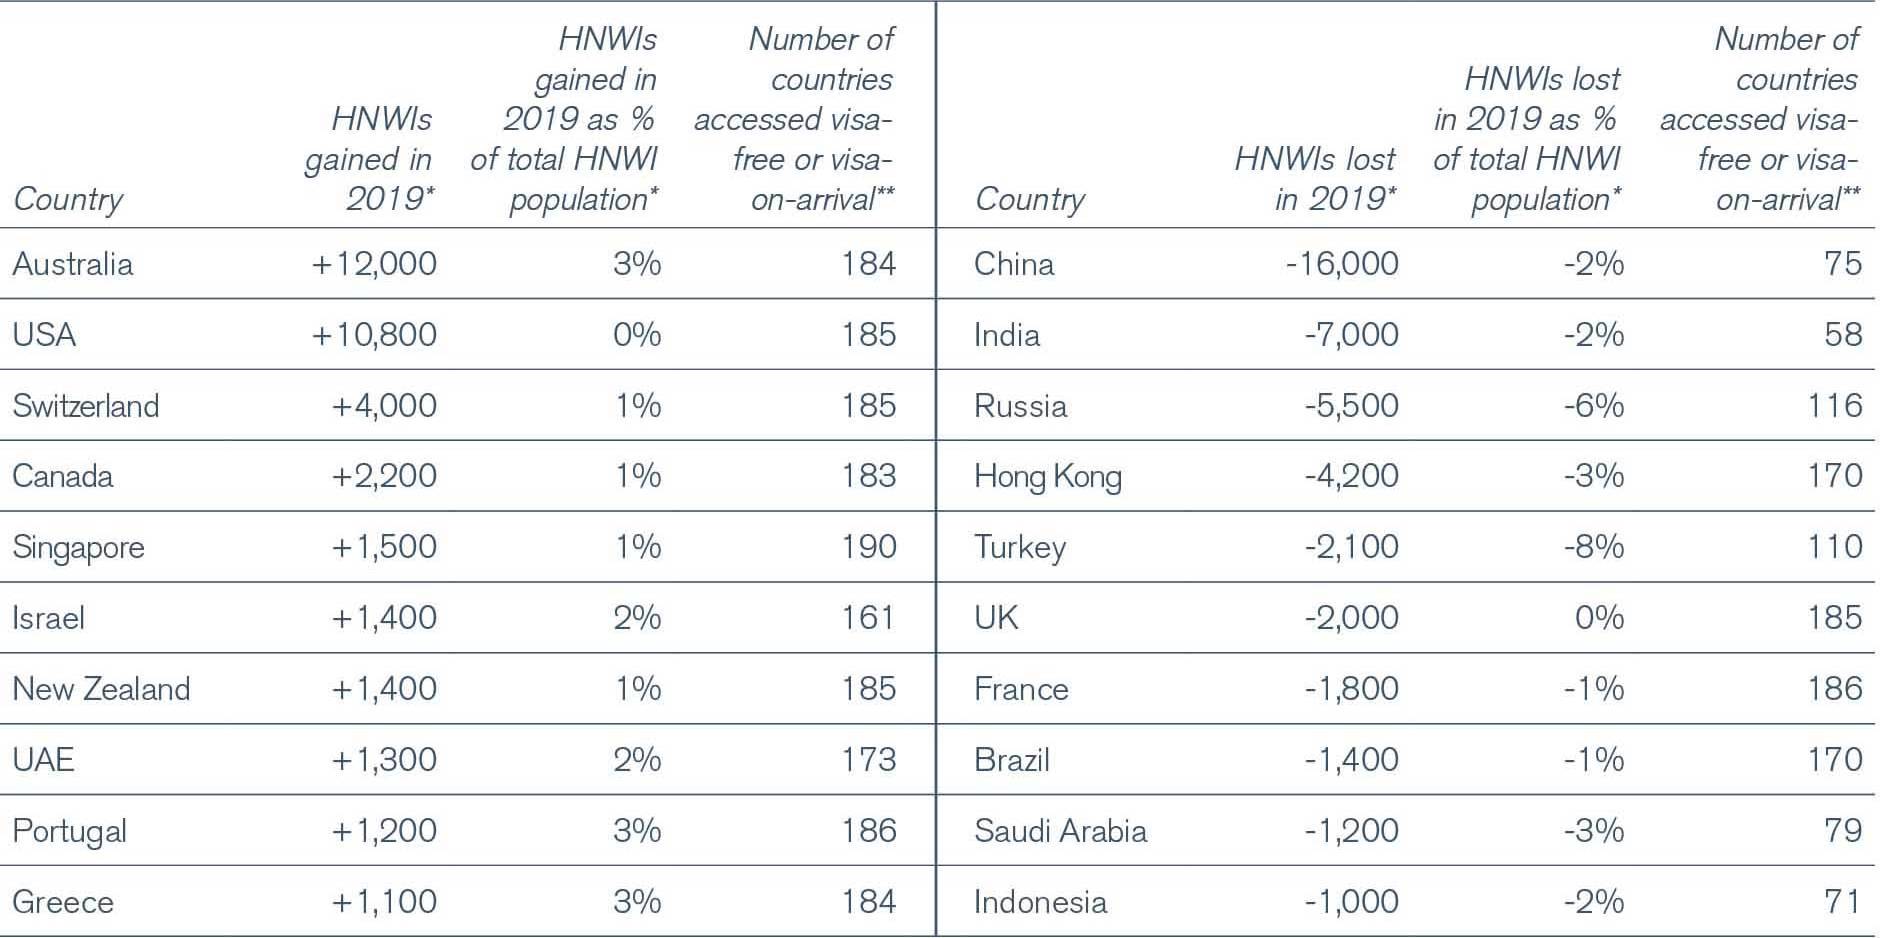 Table of Top countries gaining or losing millionaires according to Henley Passport Index